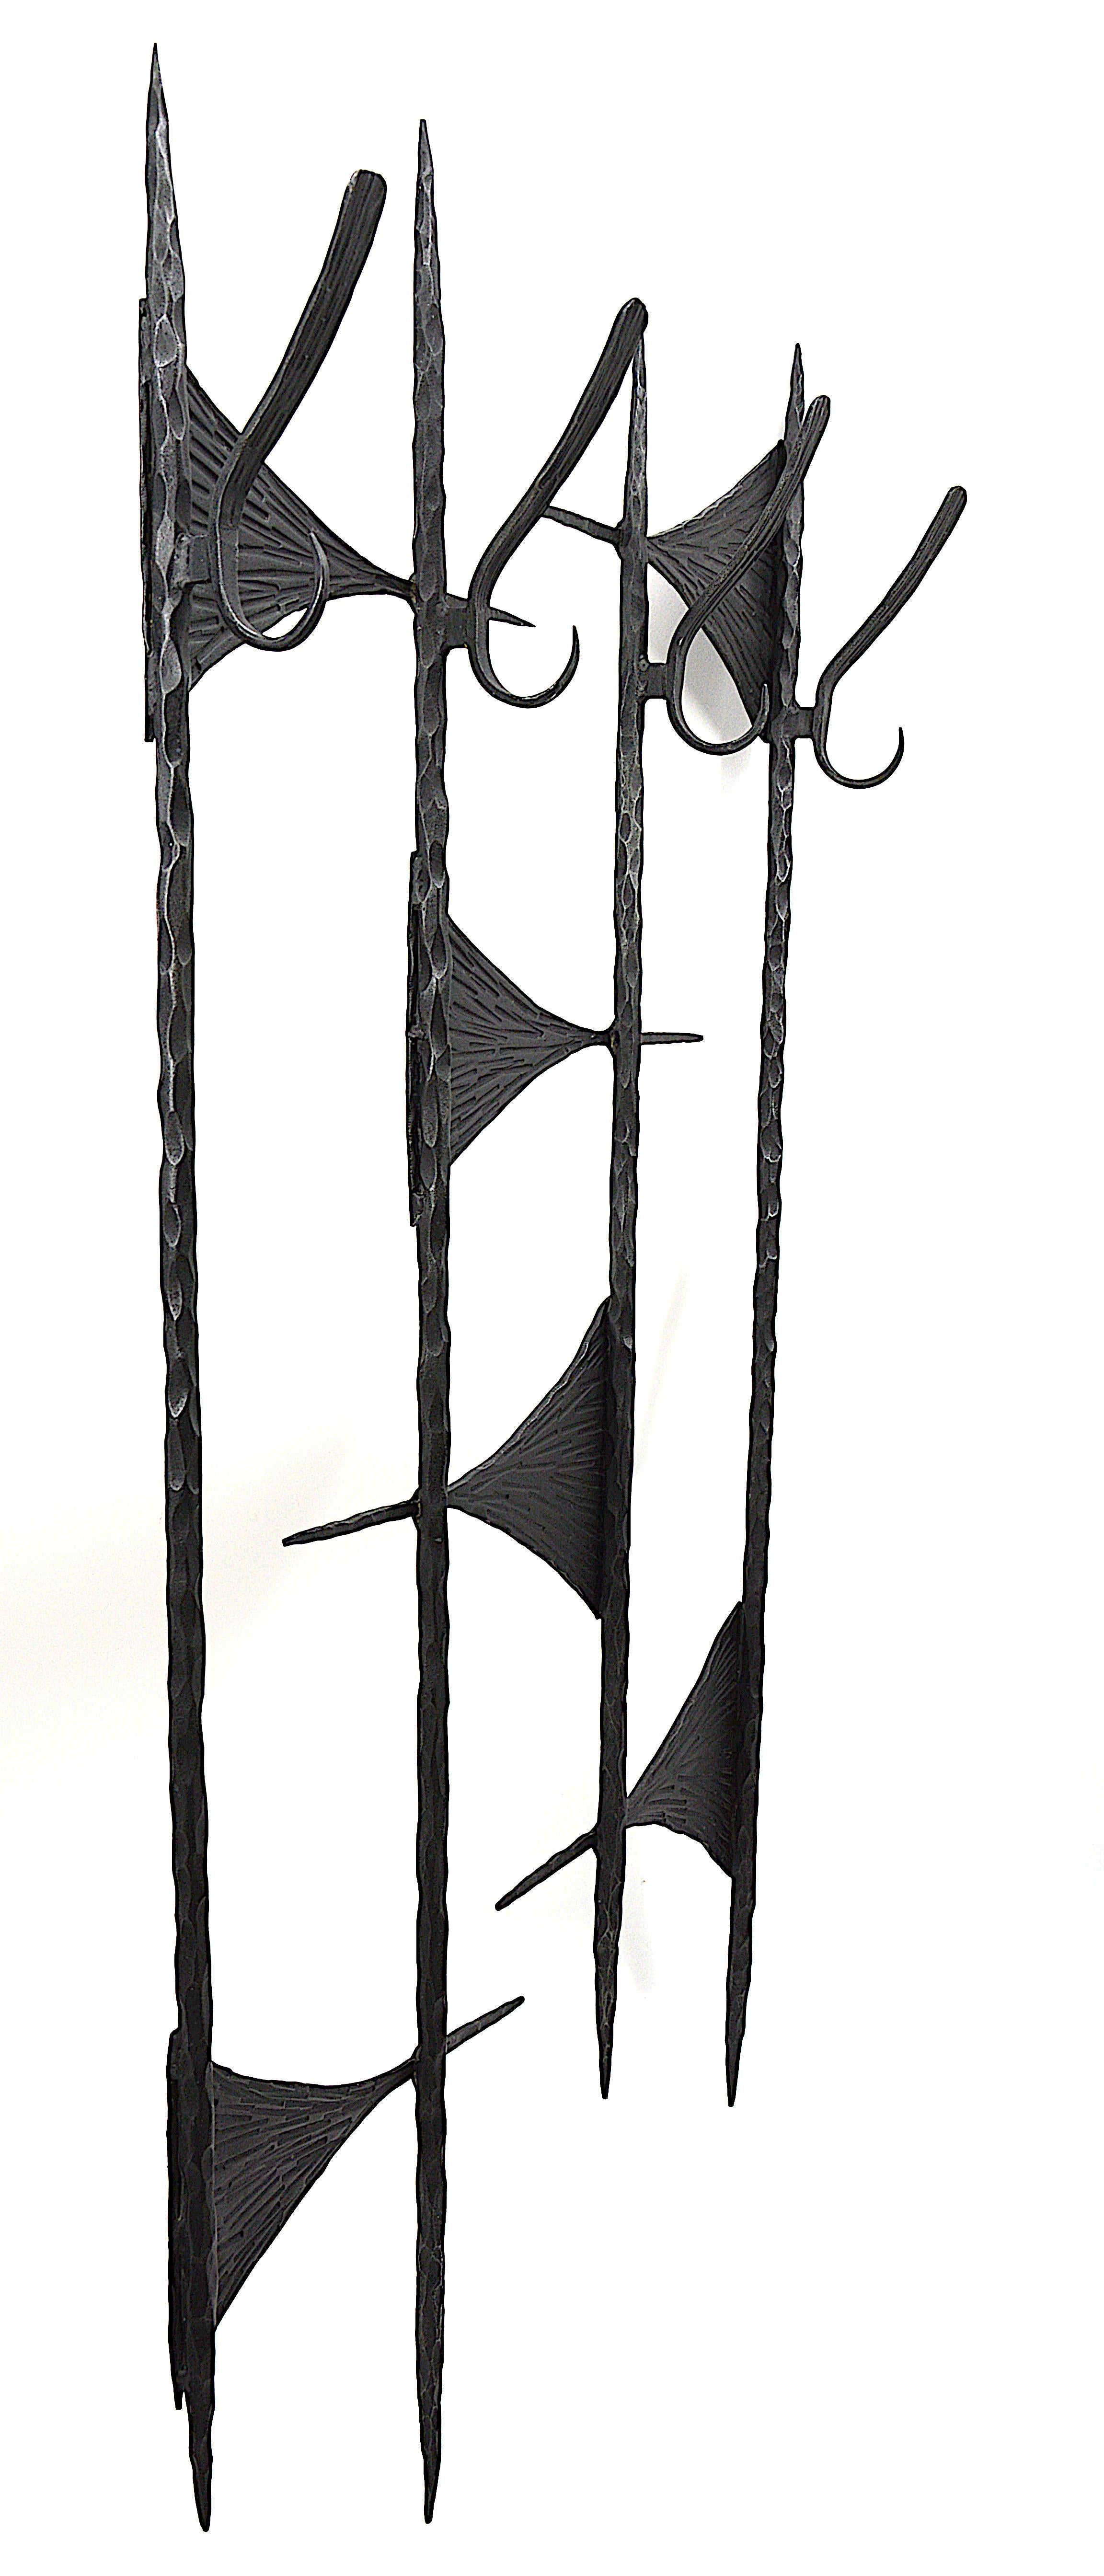 French Midcentury Wrought-Iron Coat-Rack, 1960s For Sale 6